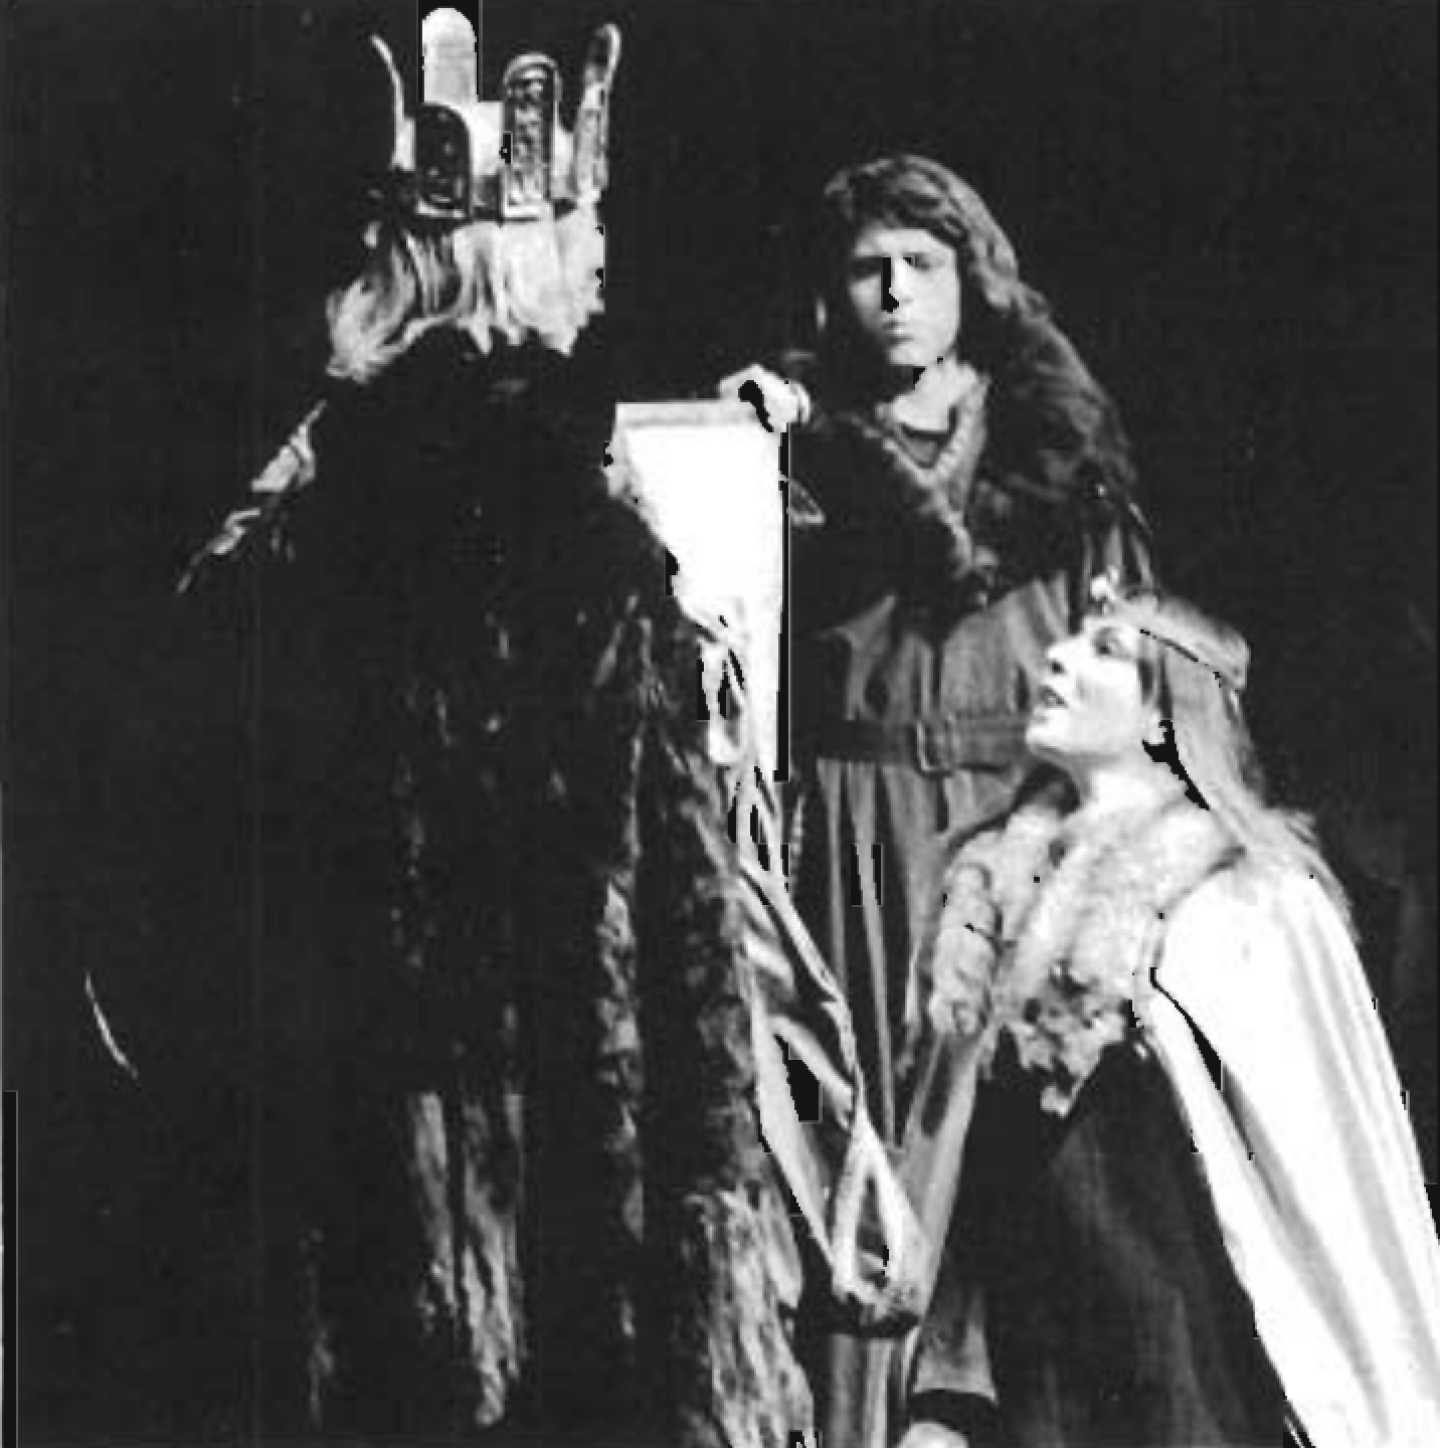 A black and white photo of students in renaissance costumes.